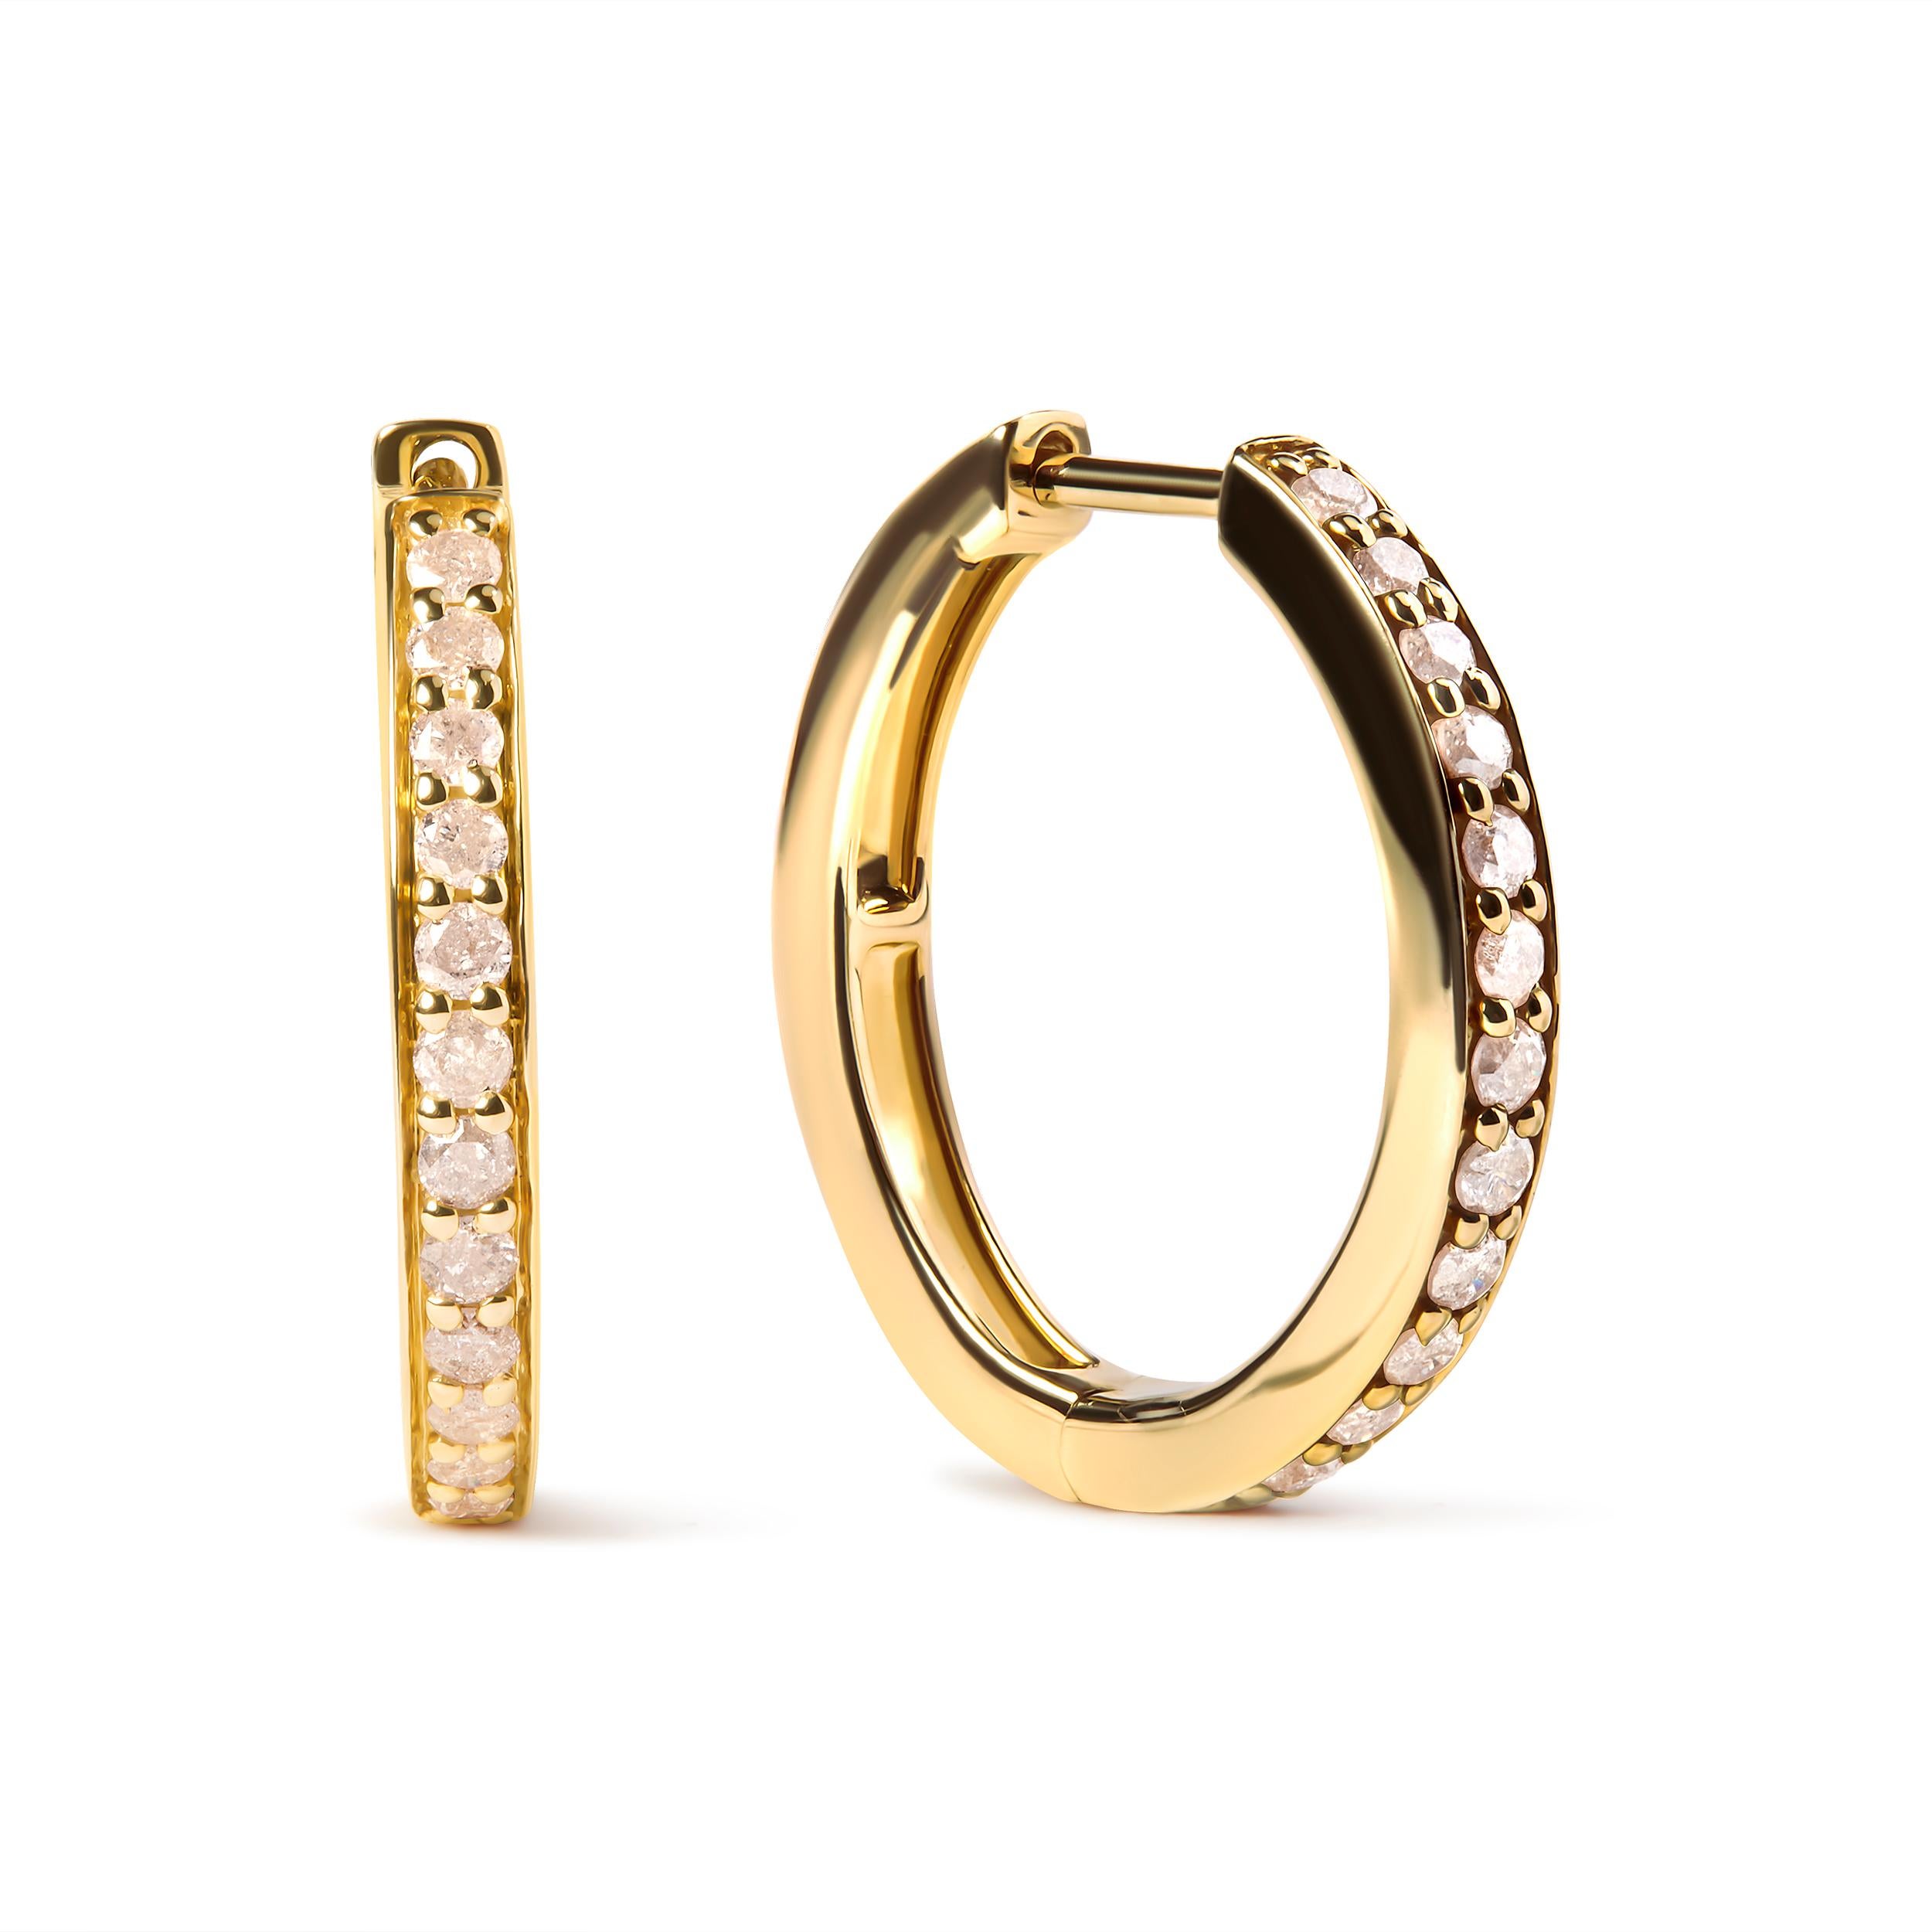 Embrace the allure of these 10K yellow gold hoop earrings, a perfect fusion of sophistication and style. With 24 natural round-cut diamonds totaling 1/2 cttw, these beauties sparkle with a breathtaking I-J color and I2-I3 clarity, secured in a